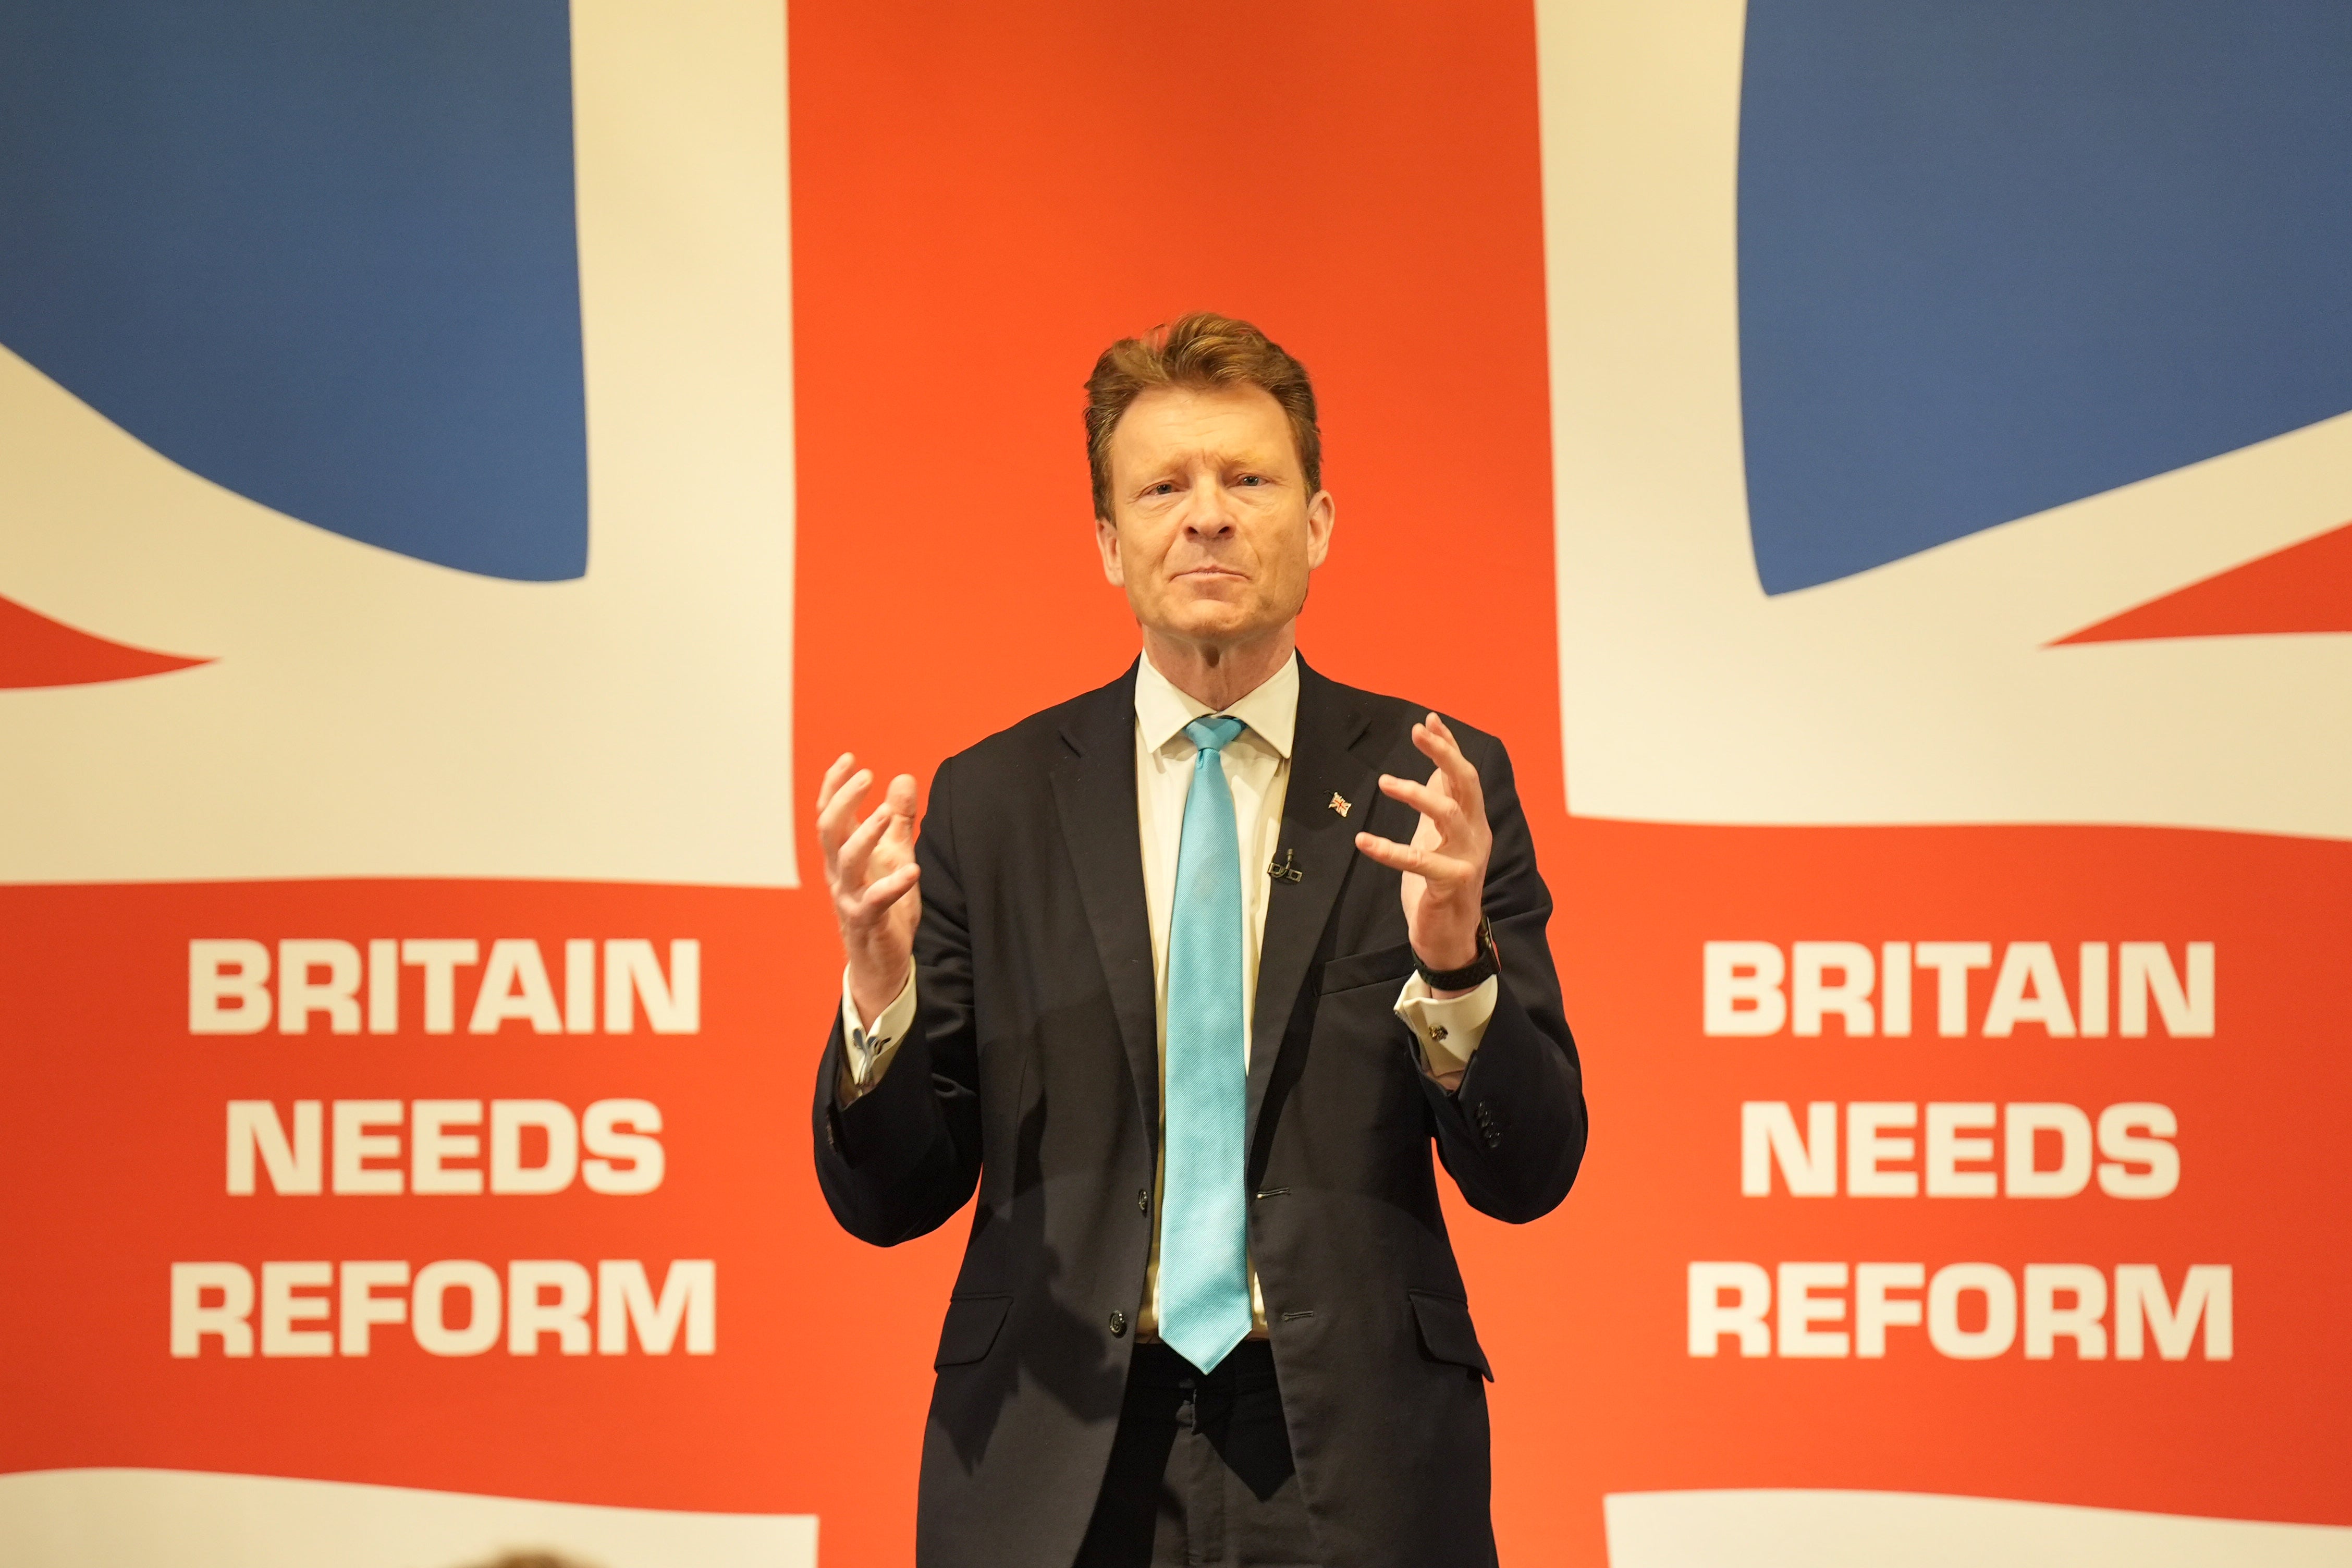 Leader of Reform UK Richard Tice speaks during a press conference to announce their party's legal immigration policy